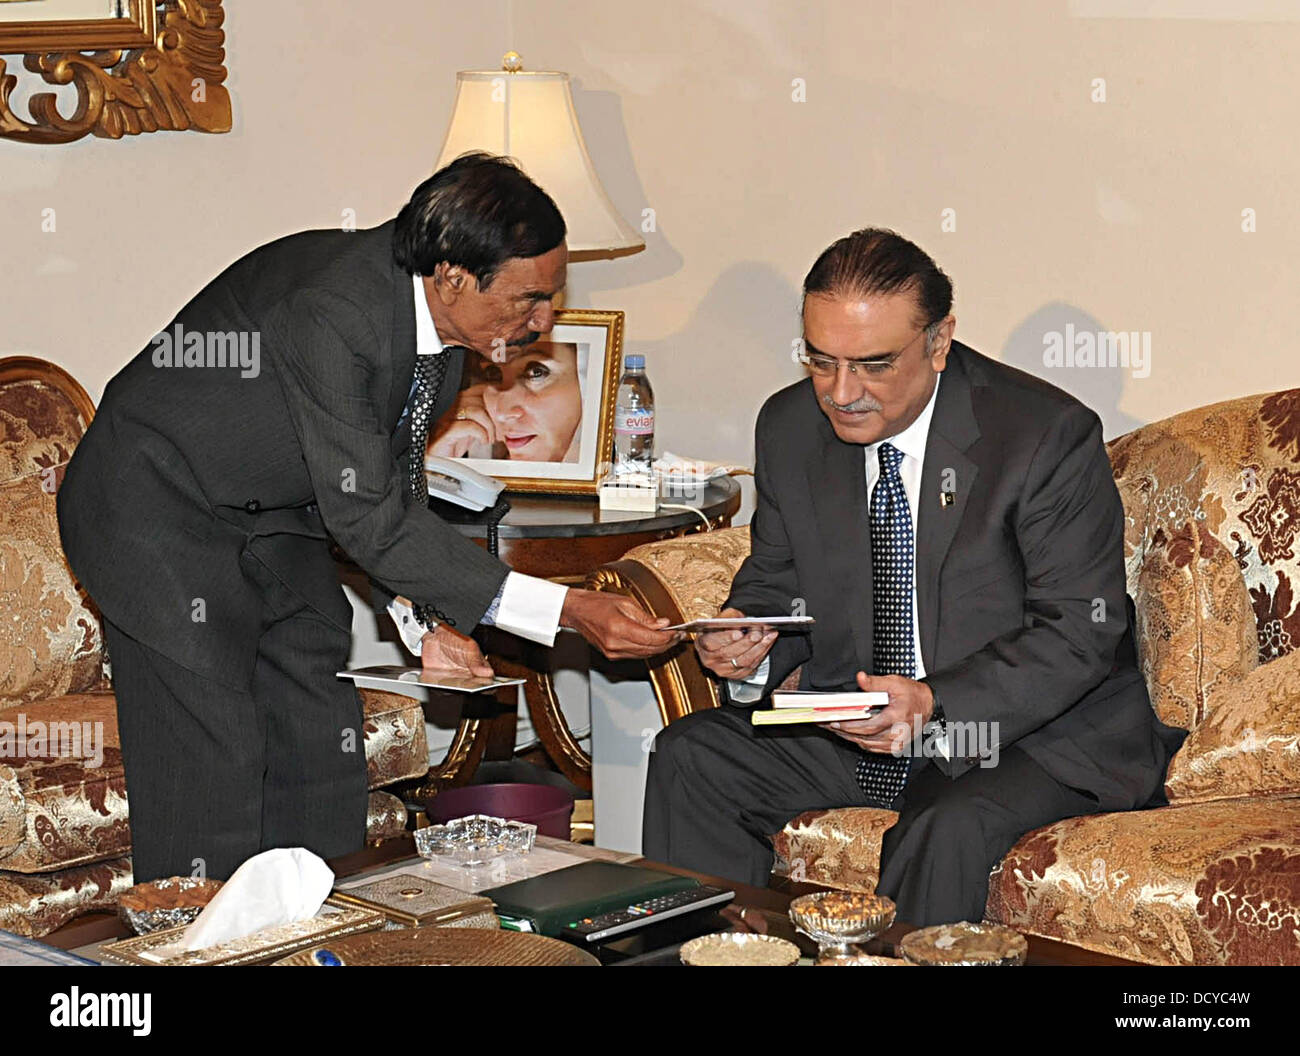 Islamabad, Pakistan. 22nd August 2013.  Syed Sartaj Hussain Shah presenting his book to President Asif Ali Zardari at the Aiwan-e-Sadr, Islamabad on August 22, 2013.      Handout by Pakistan informtion department      (Photo by PID/Deanpictures/Alamy Live News) Stock Photo